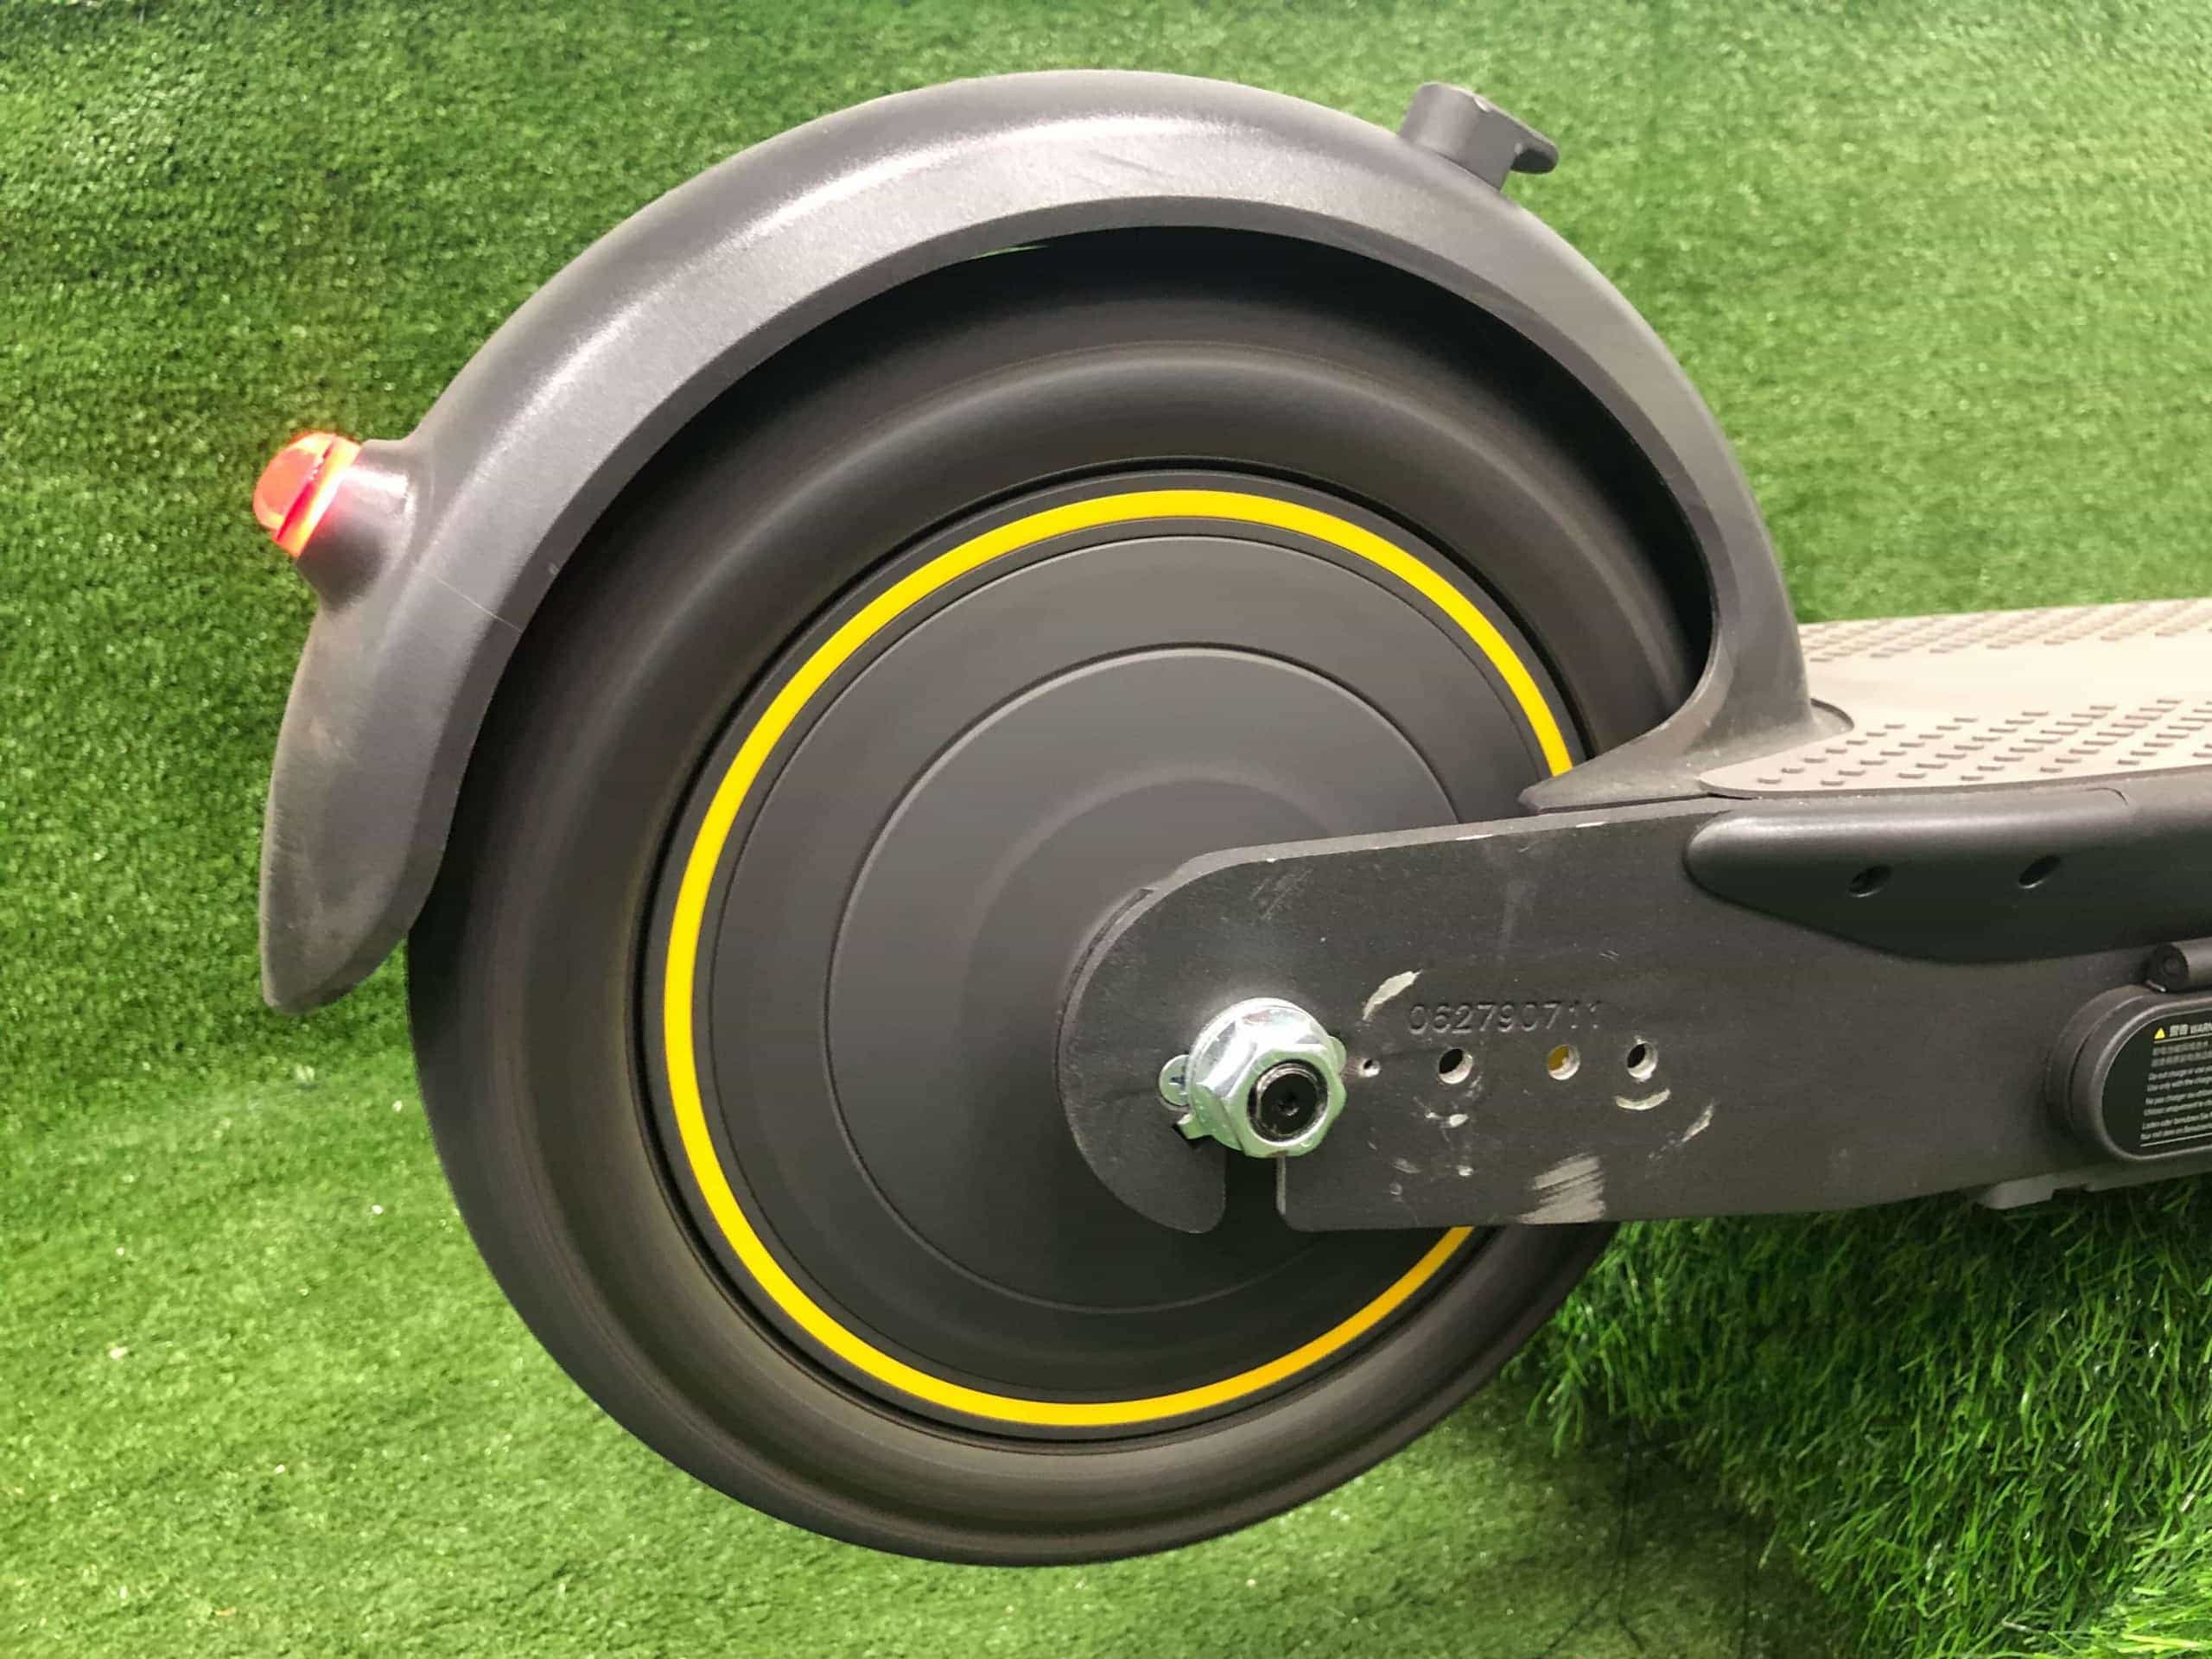 NINEBOT MAX UL2272 certified electric scooter rear wheel drive scaled - Is NINEBOT MAX the best e-scooter released in 2019?